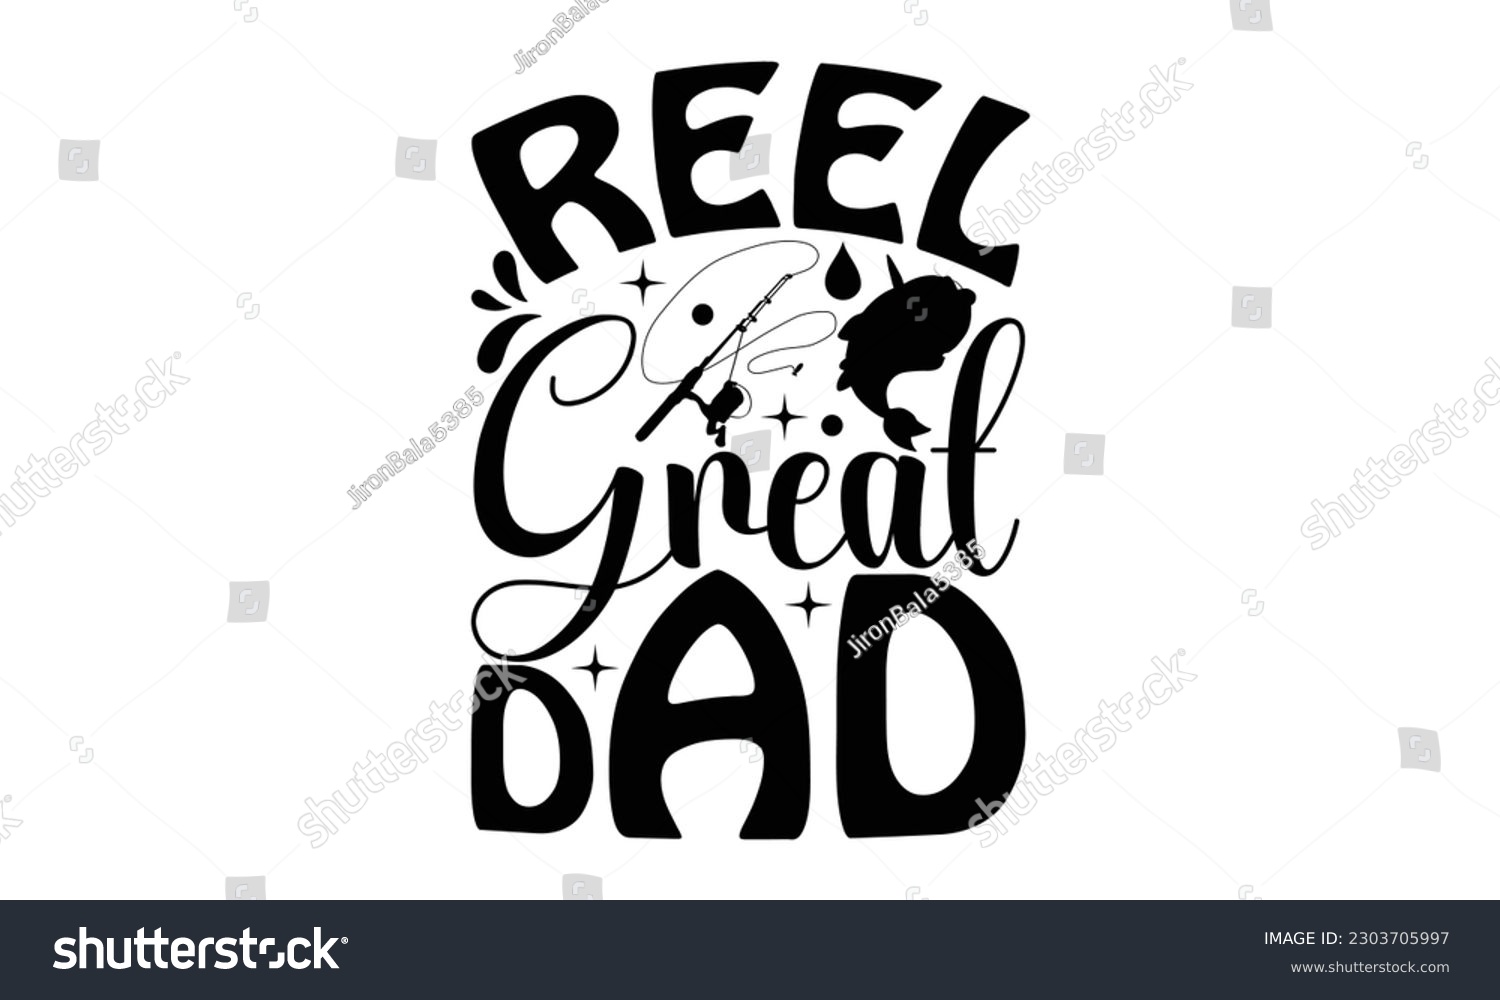 SVG of Reel Great Dad - Fishing SVG Design, Hand drawn lettering phrase, Illustration for prints on t-shirts, bags, posters and cards, for Cutting Machine, Silhouette Cameo, Cricut.
 svg